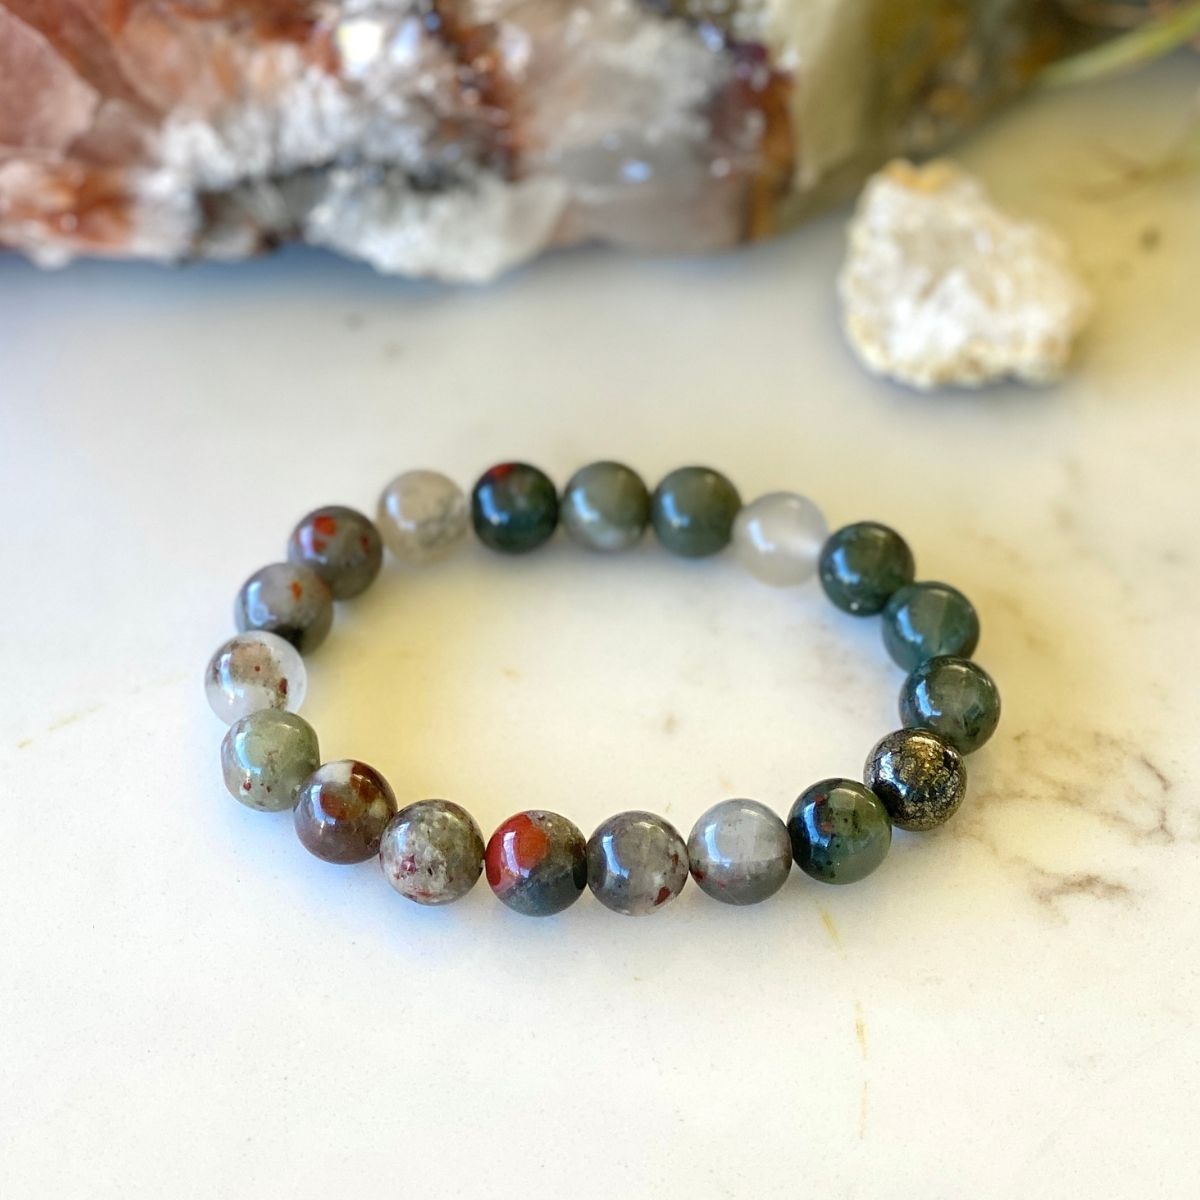 Bloodstone Bracelet for Courage.  Bloodstone is a stone of courage and wisdom, noble sacrifice, and altruistic character. Bloodstone represents a courageous spirit.